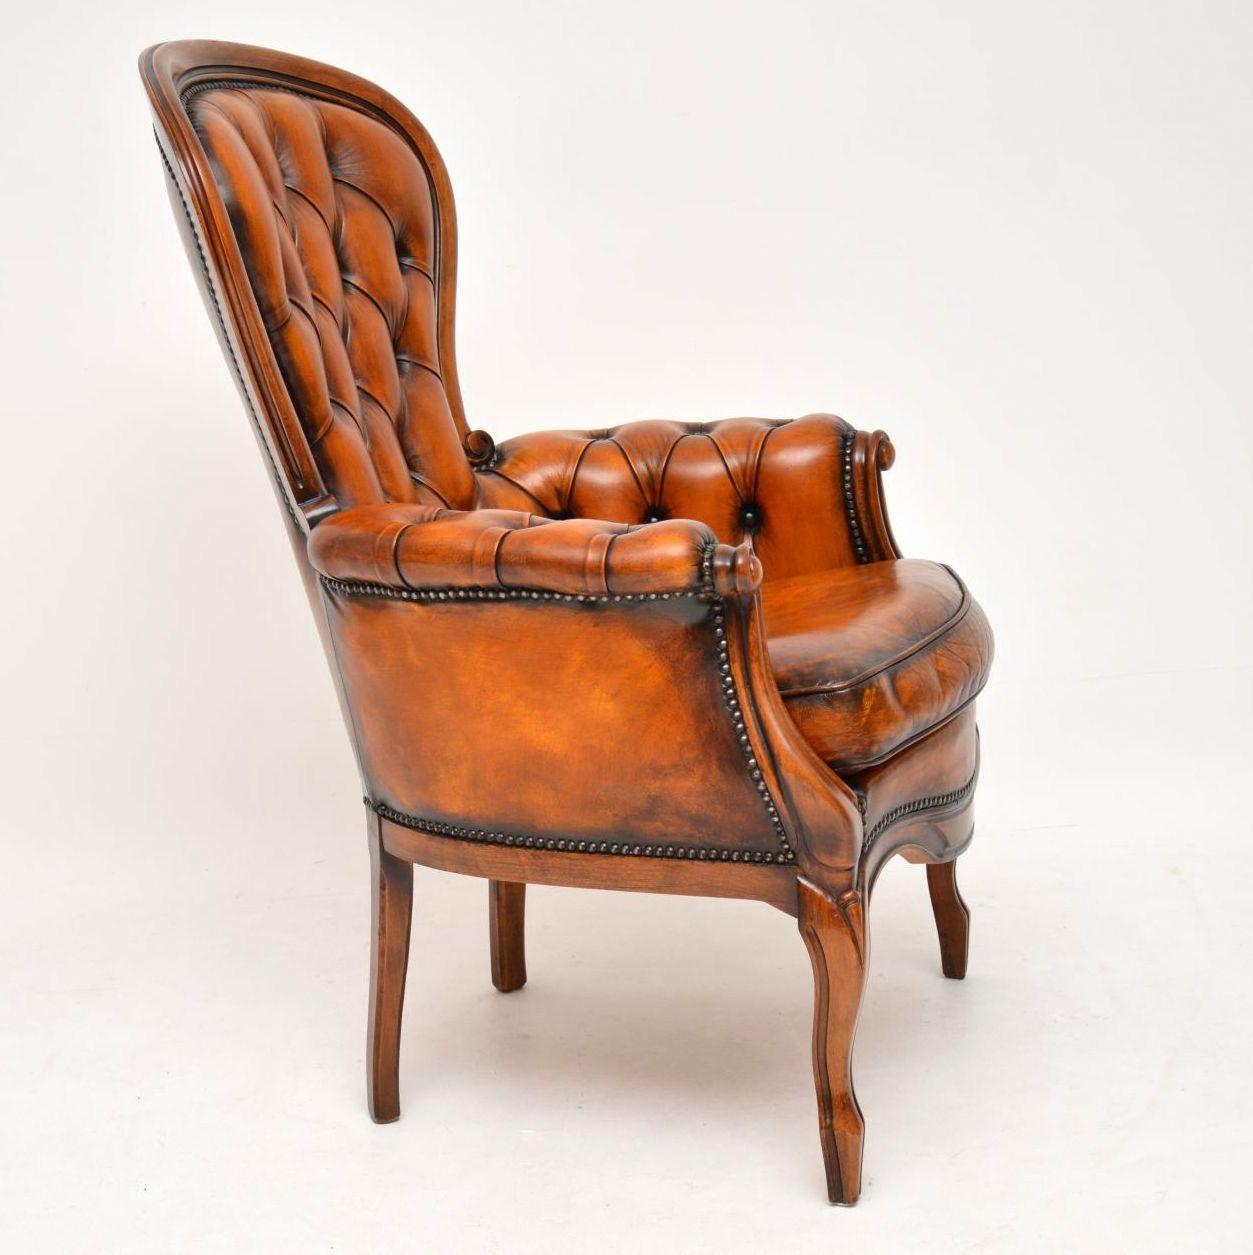 Victorian Antique Leather and Mahogany Spoon Back Armchair